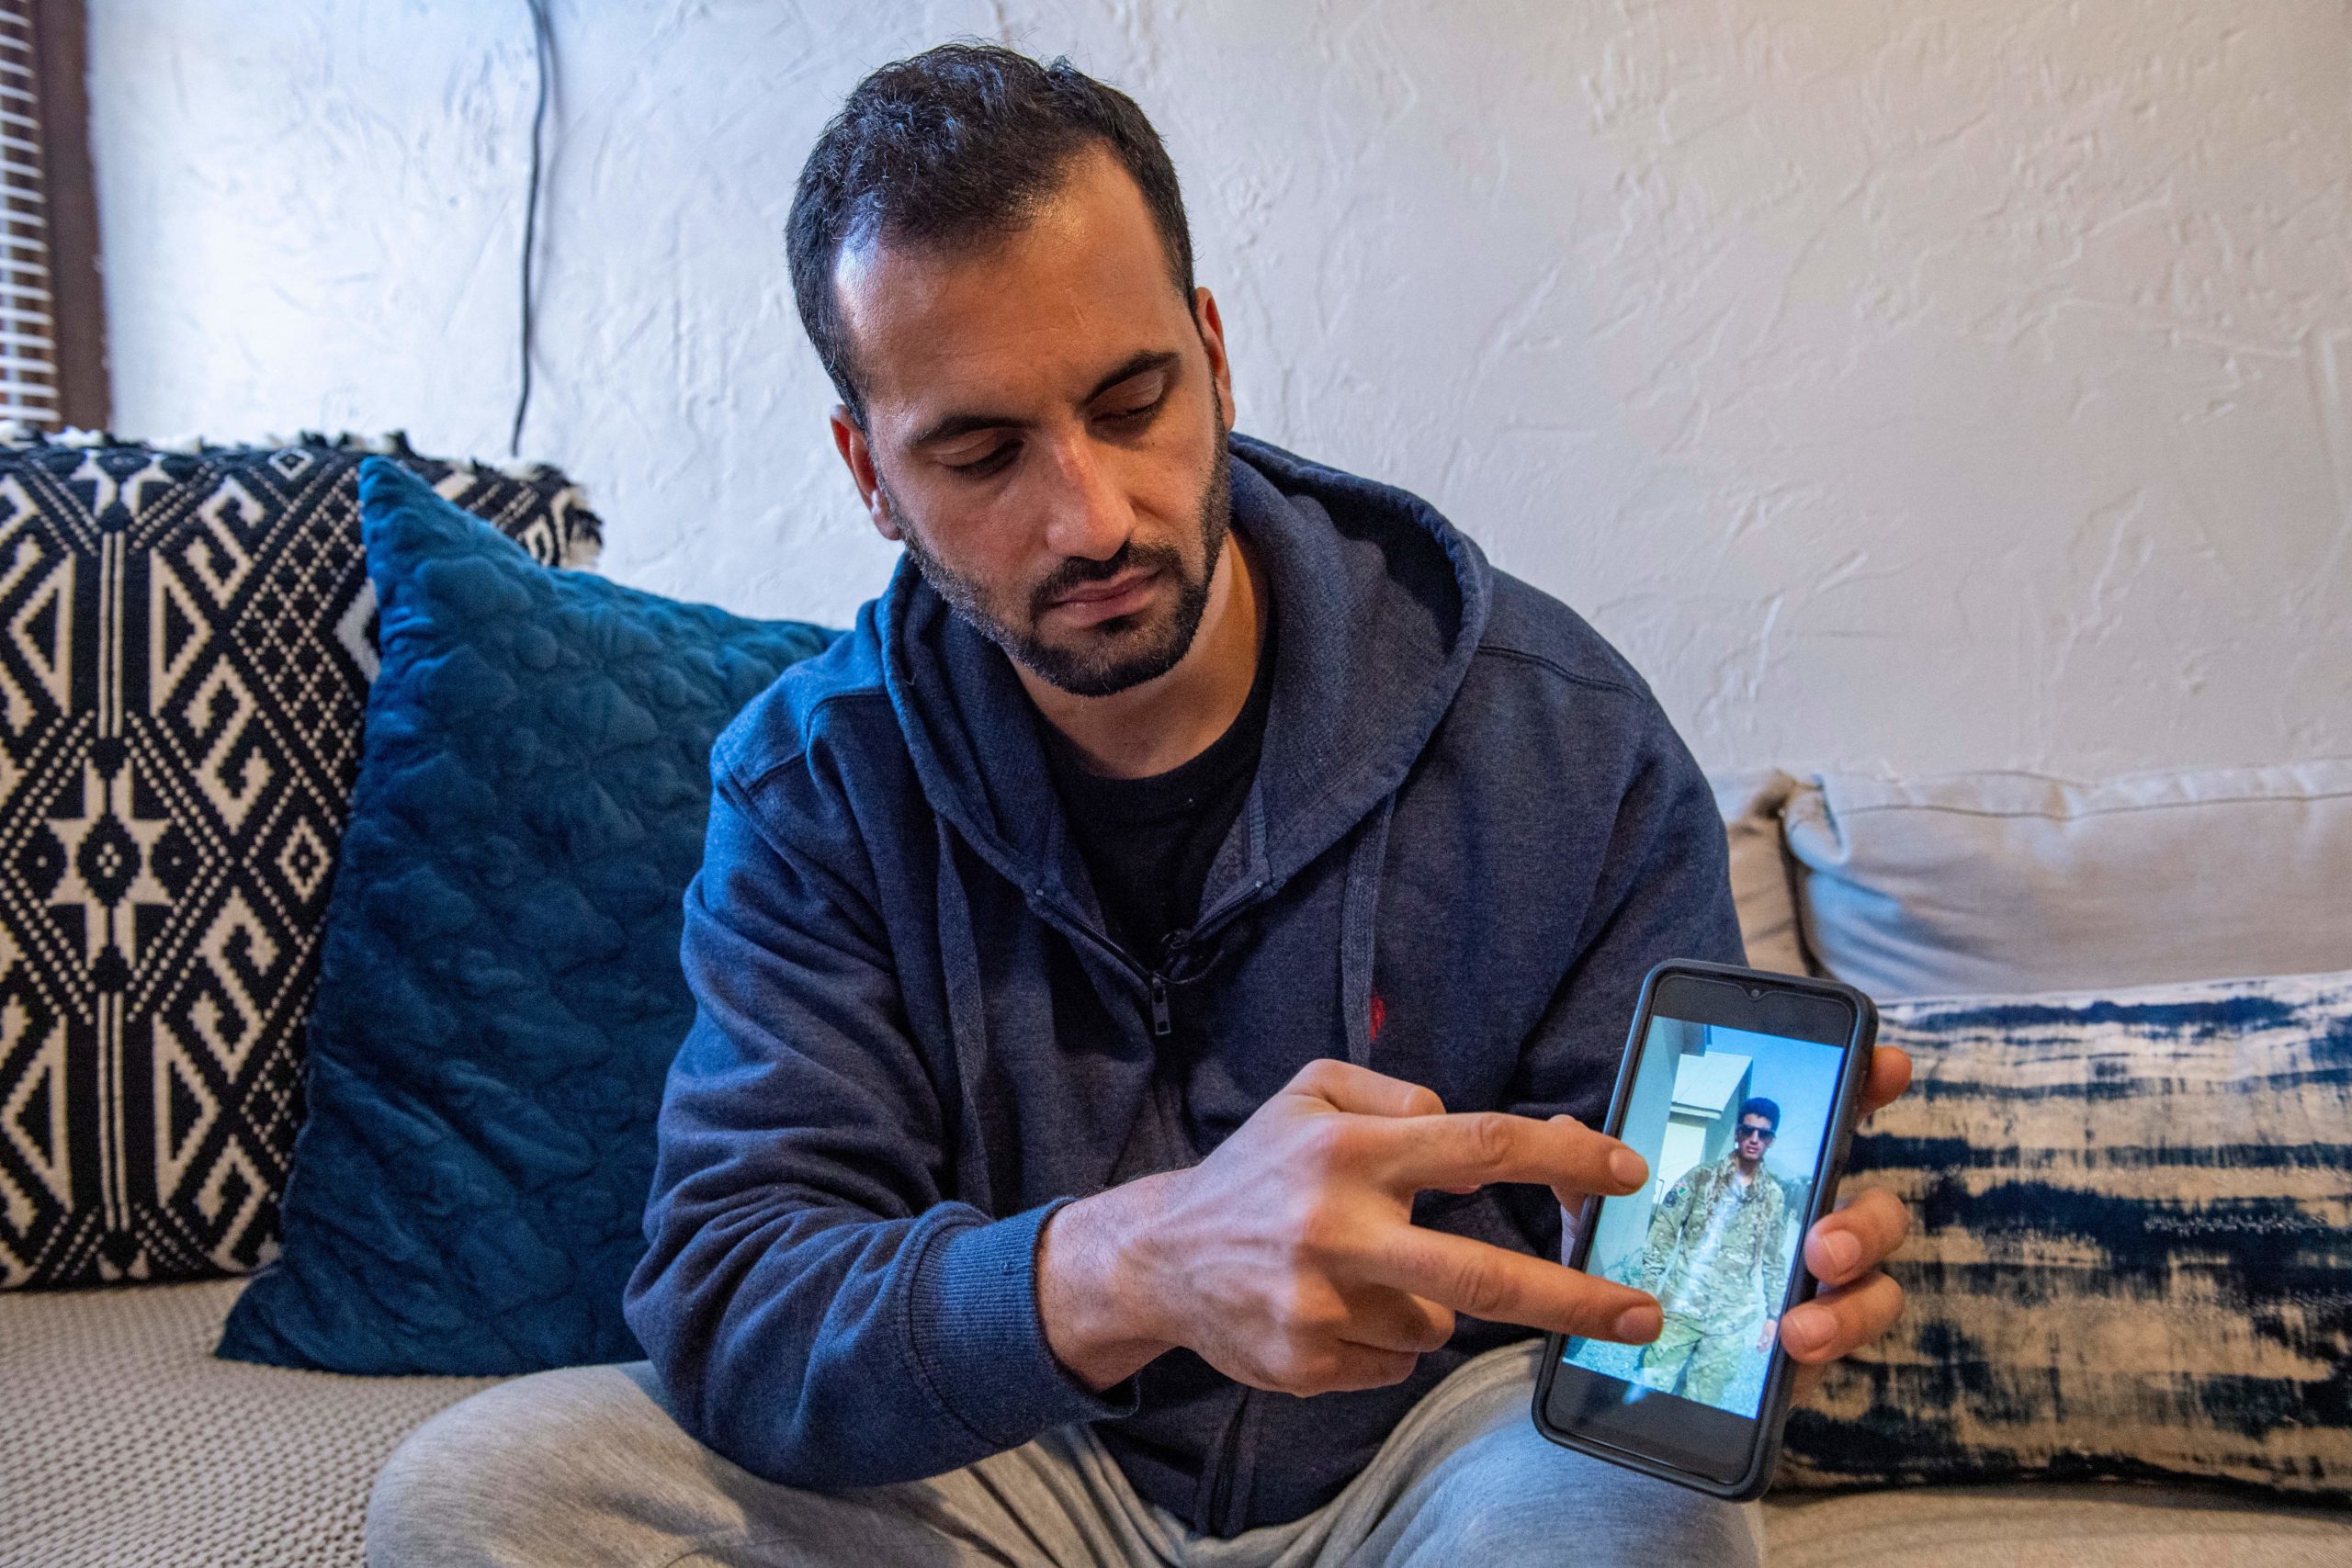 Afghani evacuee Israr, 26, points to photos on his phone of himself working in Afghanistan as a translator with military forces at his new apartment in Charlestown, Massachusetts on February 21, 2022. - In a storied corner of Boston, one of America's newest families is finding its feet months after fleeing Afghanistan: Israr and Sayeda are starting work, studying a new language and setting up home to welcome their first-born child. But like many of the tens of thousands of Afghans evacuated after Kabul's fall to the Taliban, the young couple -- who asked to be identified by first names only -- are also taking steps to ensure the rug doesn't get pulled out from under their new life. Though he worked as a US Army interpreter, Israr and his wife are in the United States on what is known as humanitarian parole, a "tenuous legal status," according to resettlement organizations, that offers only two years residence. After an arduous, months-long journey that took them from Kabul via Qatar to an army base in Texas, the pair settled early this year in Boston's Charlestown neighborhood where they were taken under the wing of a couple they now call their second "mama and papa." 